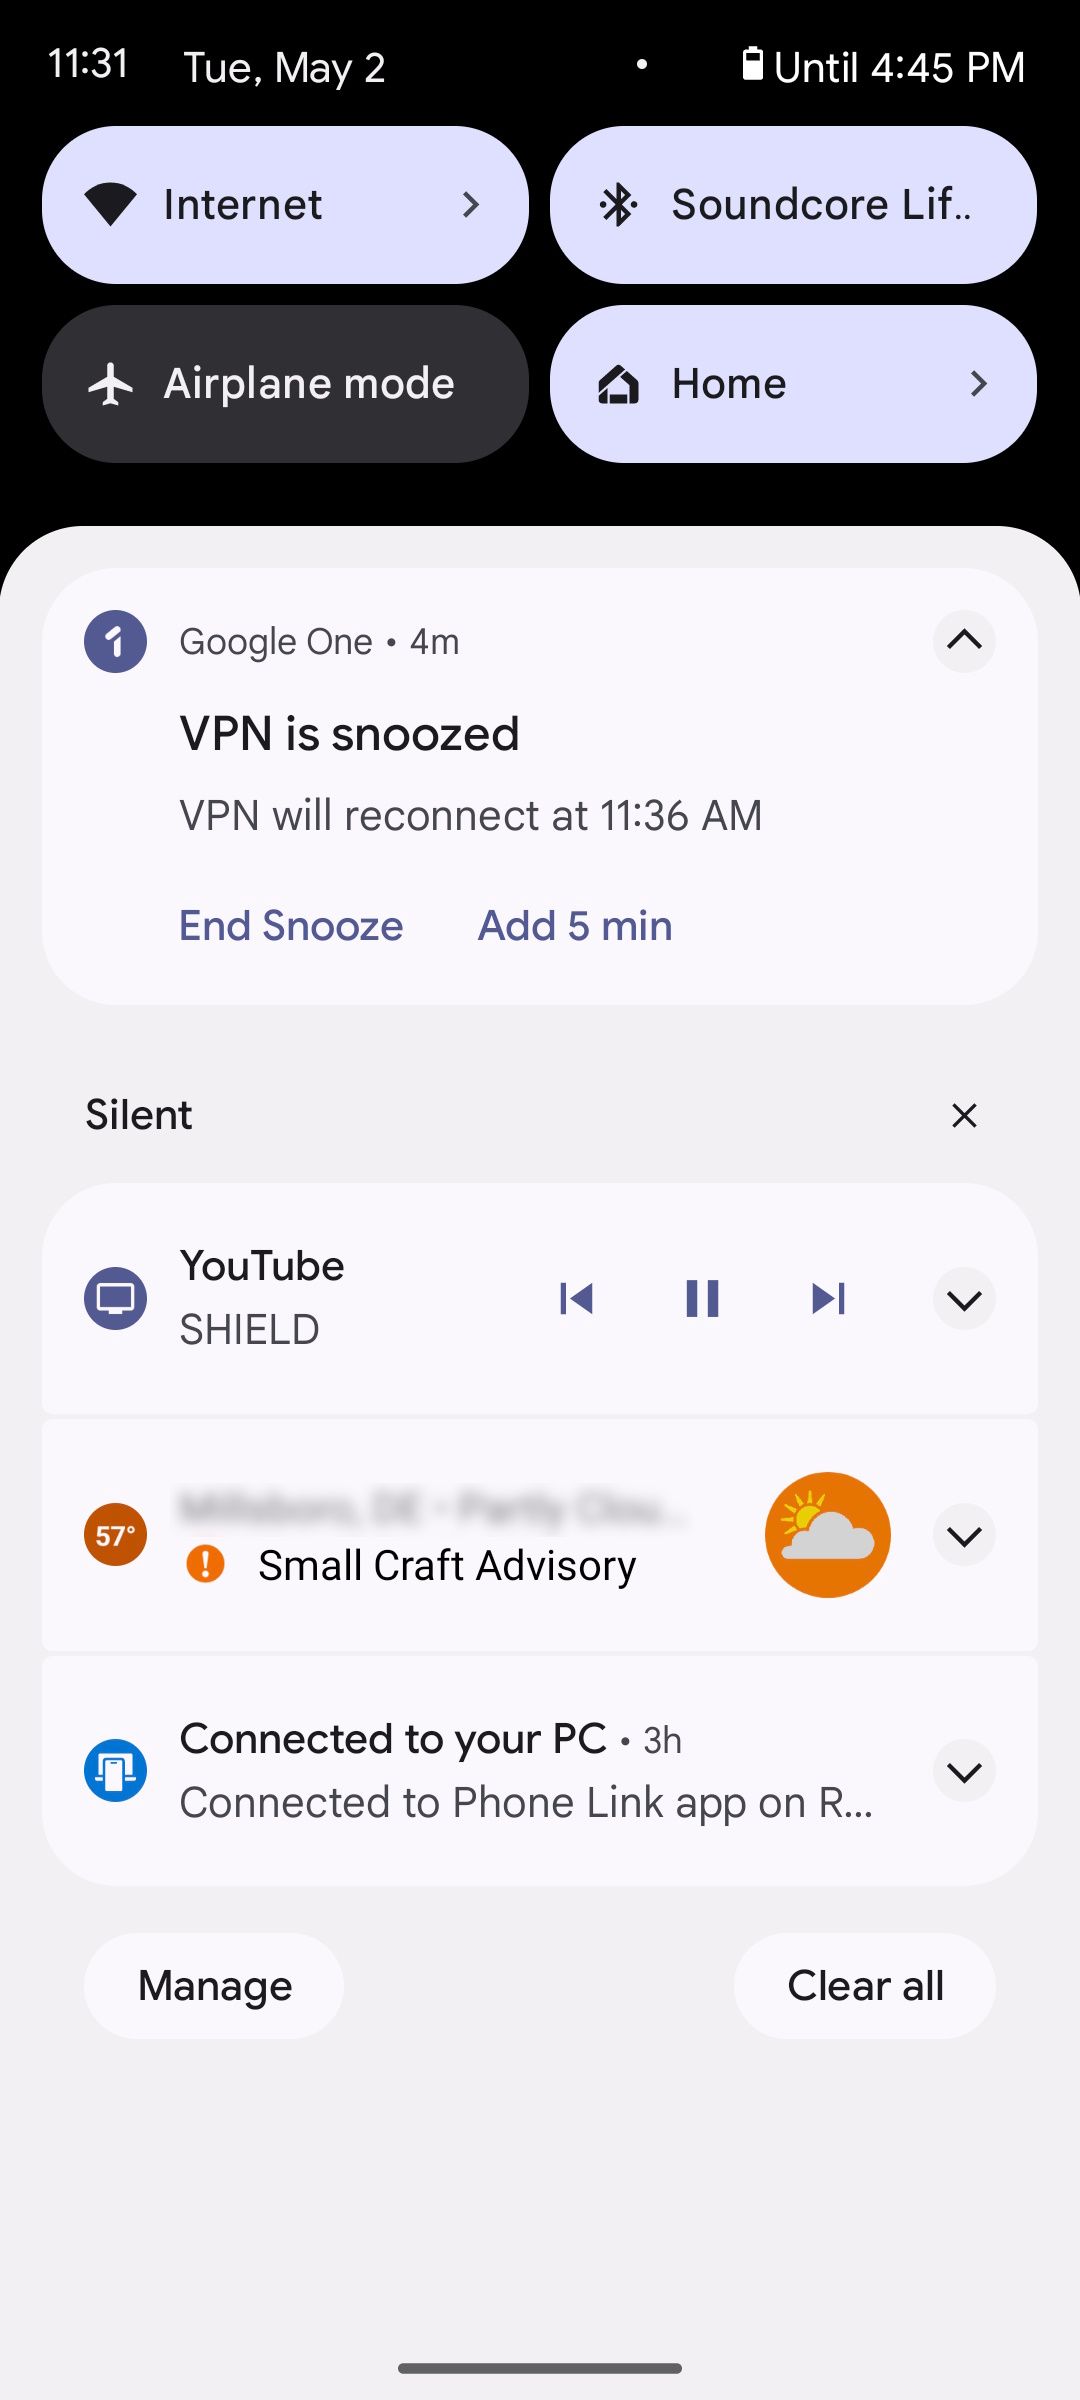 Snoozing VPN by Google One